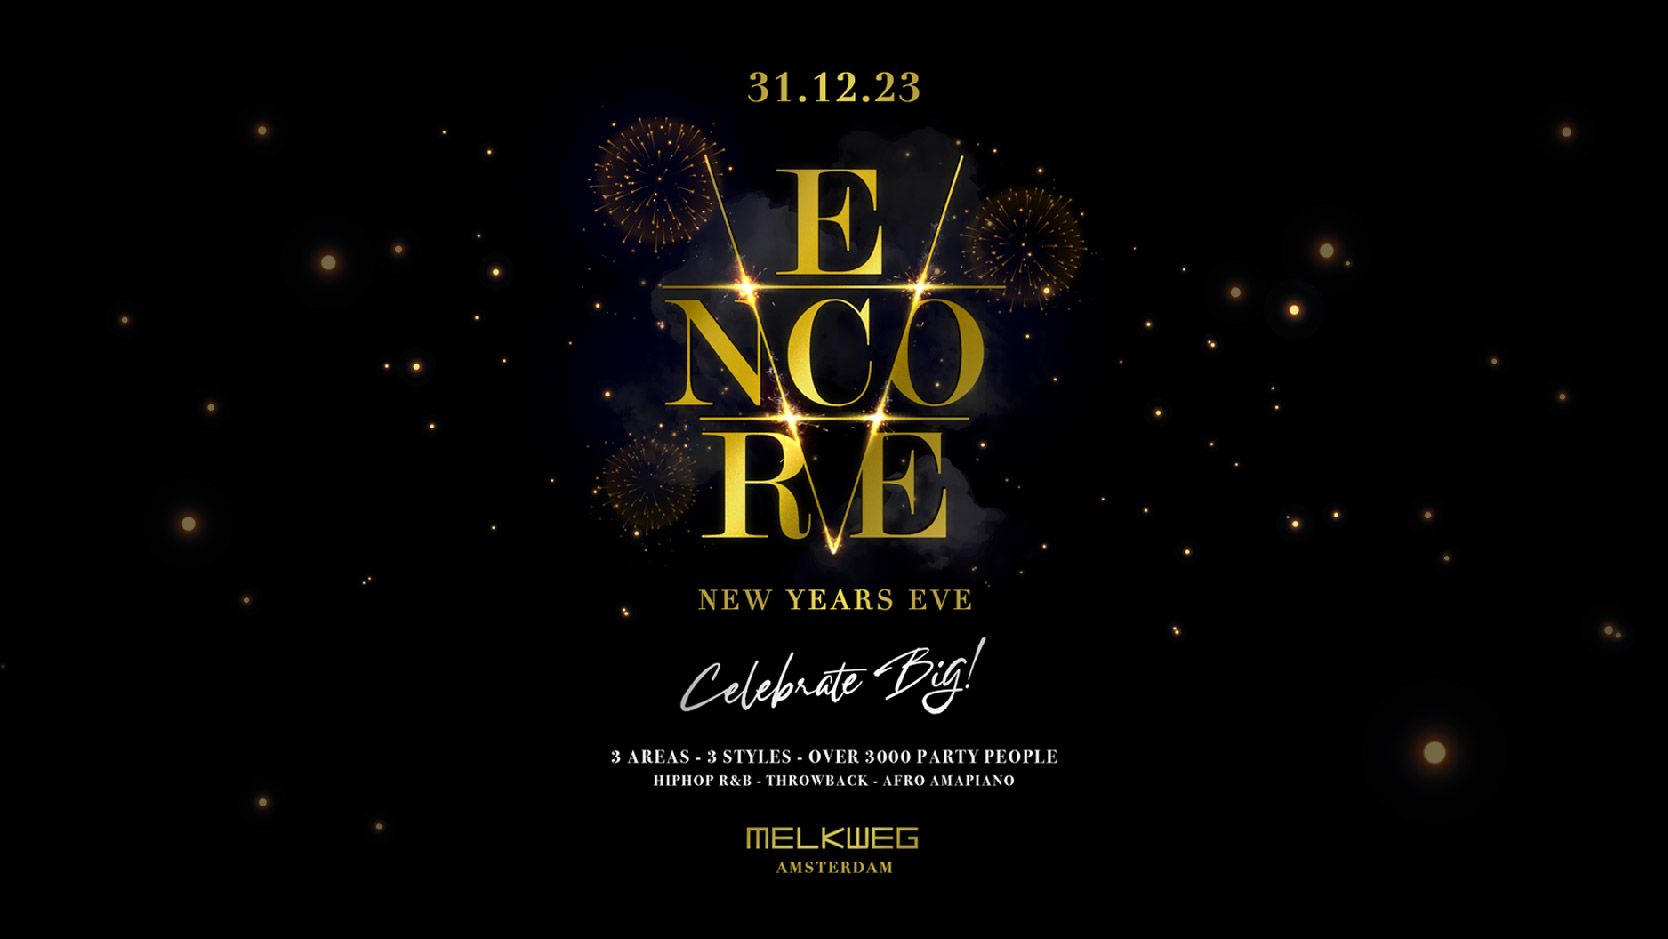 Encore New Years Eve cover